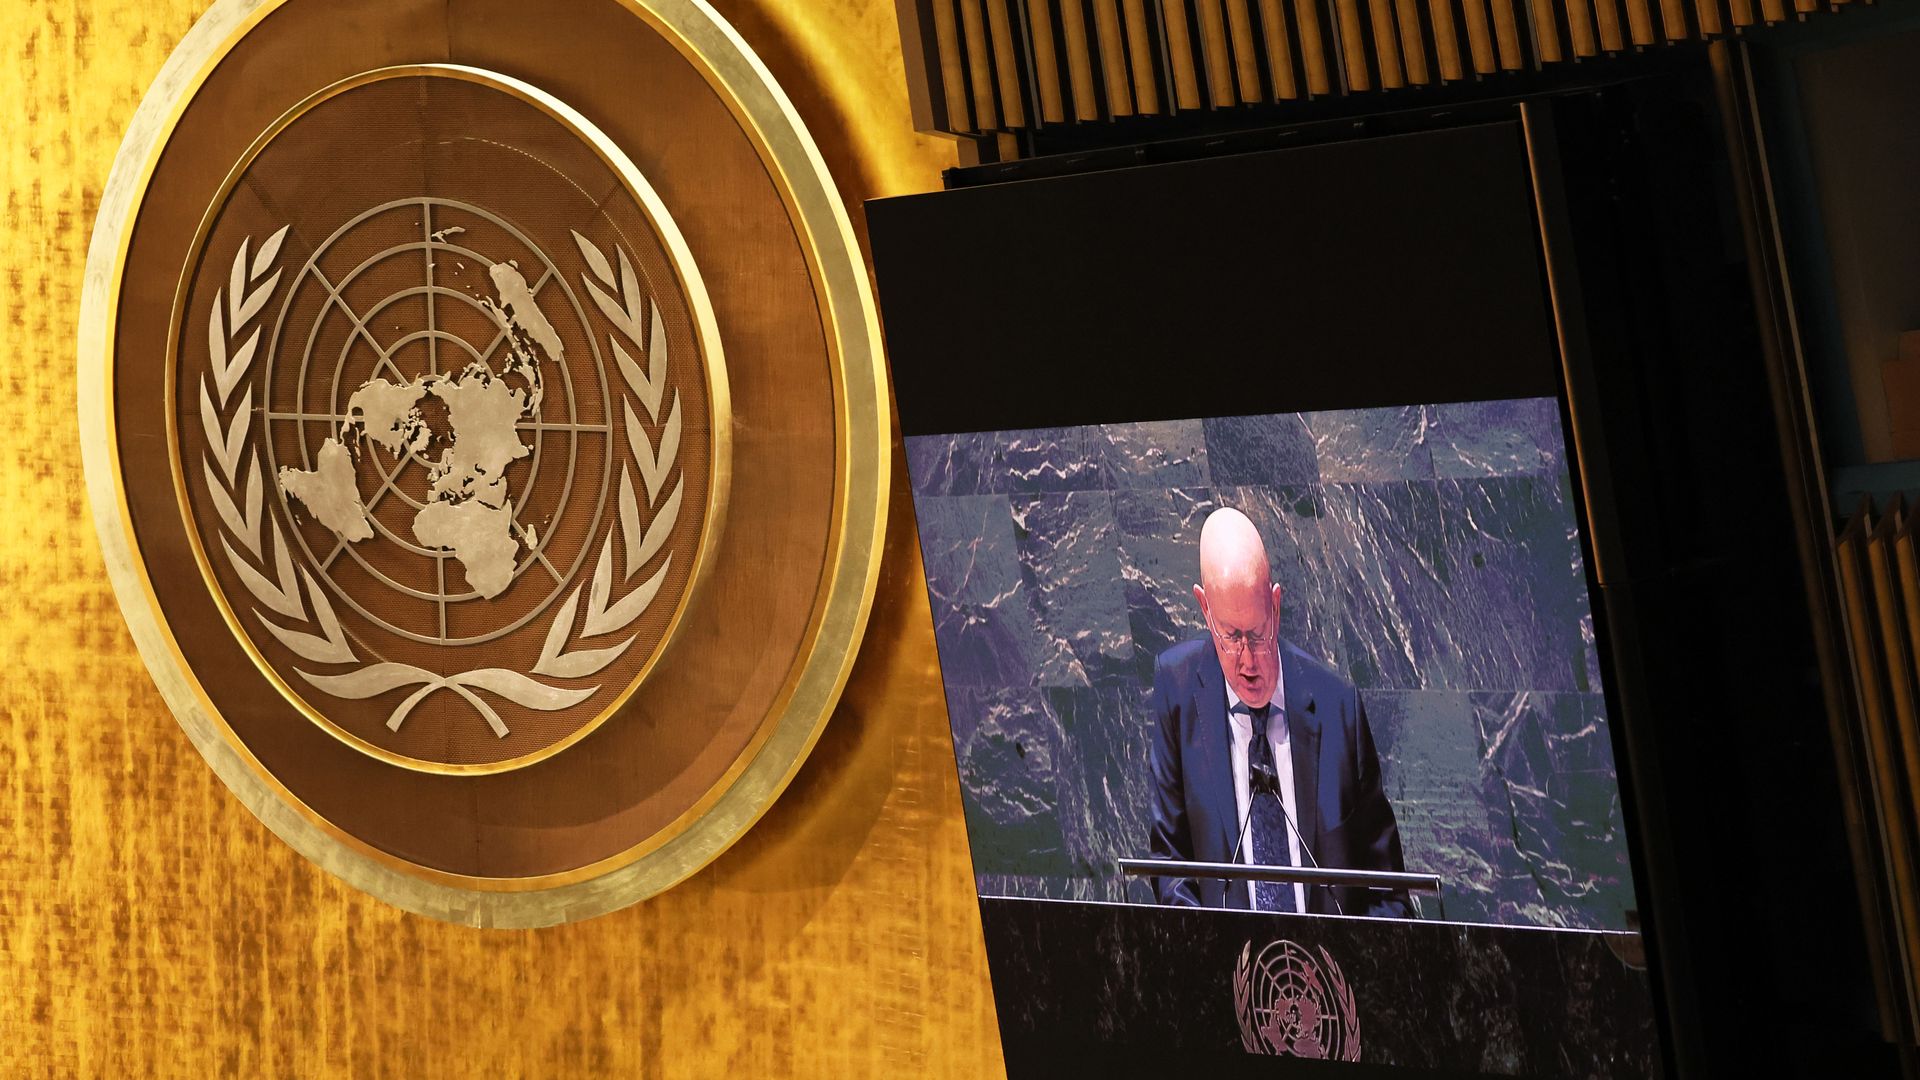 Photo of the UN seal next to a screen showing a person speaking